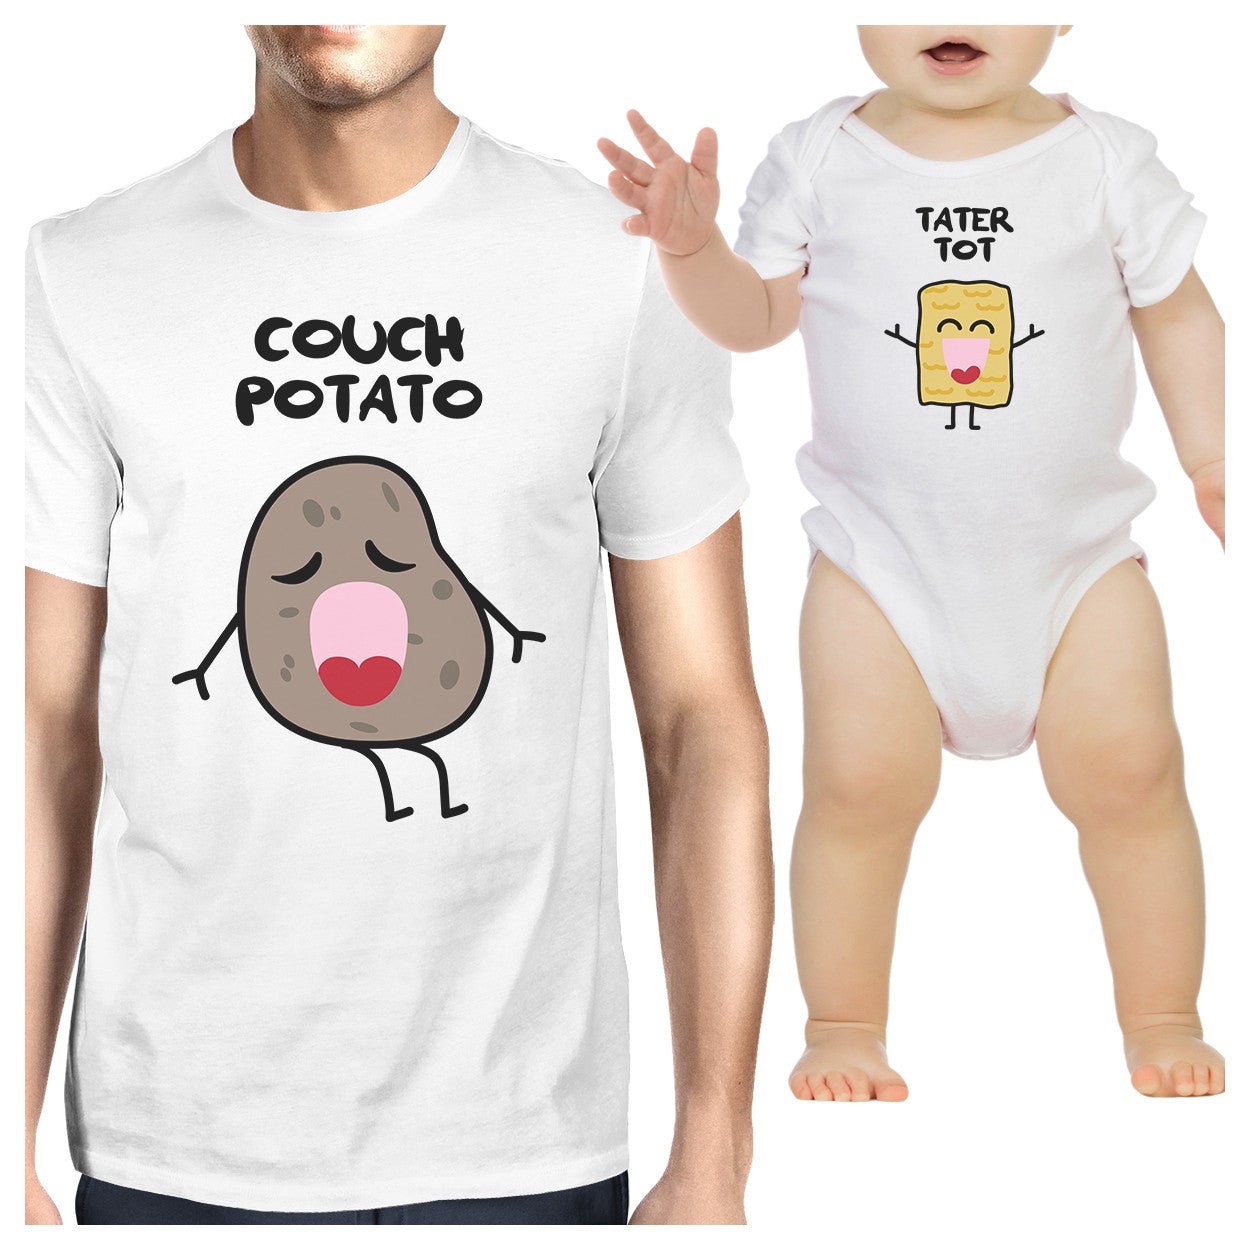 Couch Potato Tater Tot Dad and Baby Matching White Shirts